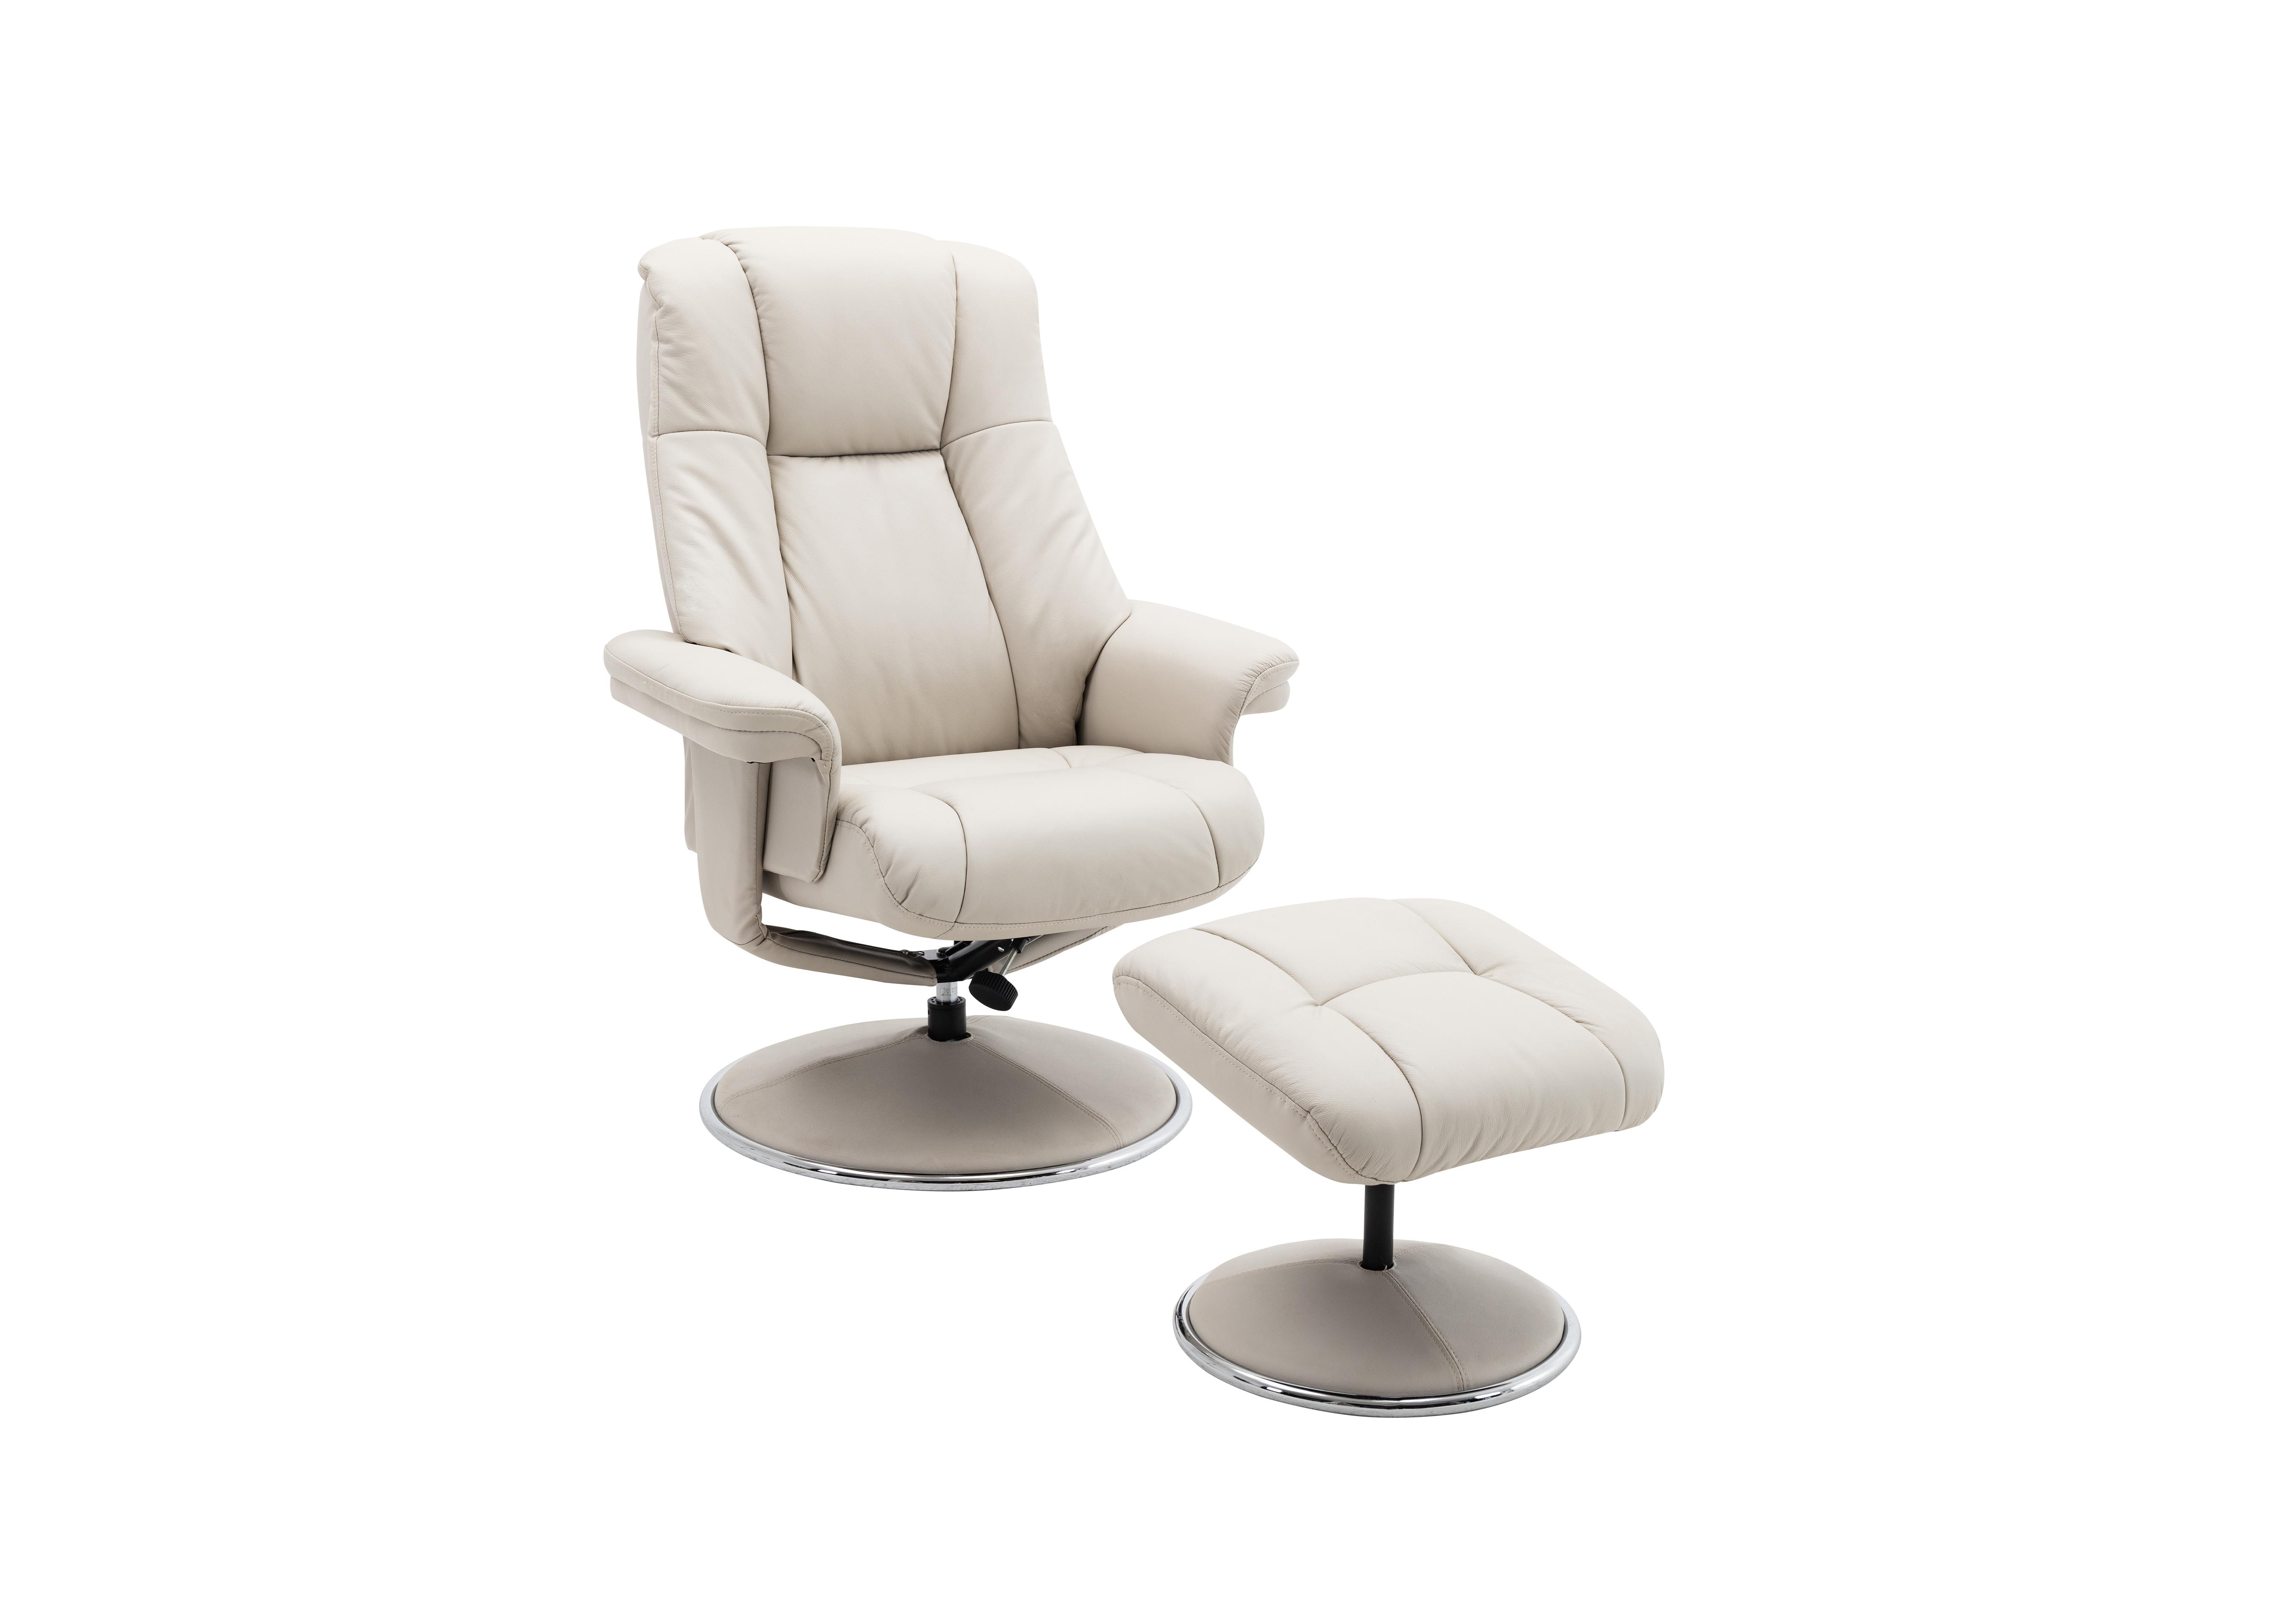 Troyes Leather Look High-Back 360 Swivel Chair and Footstool in Mushroom on Furniture Village